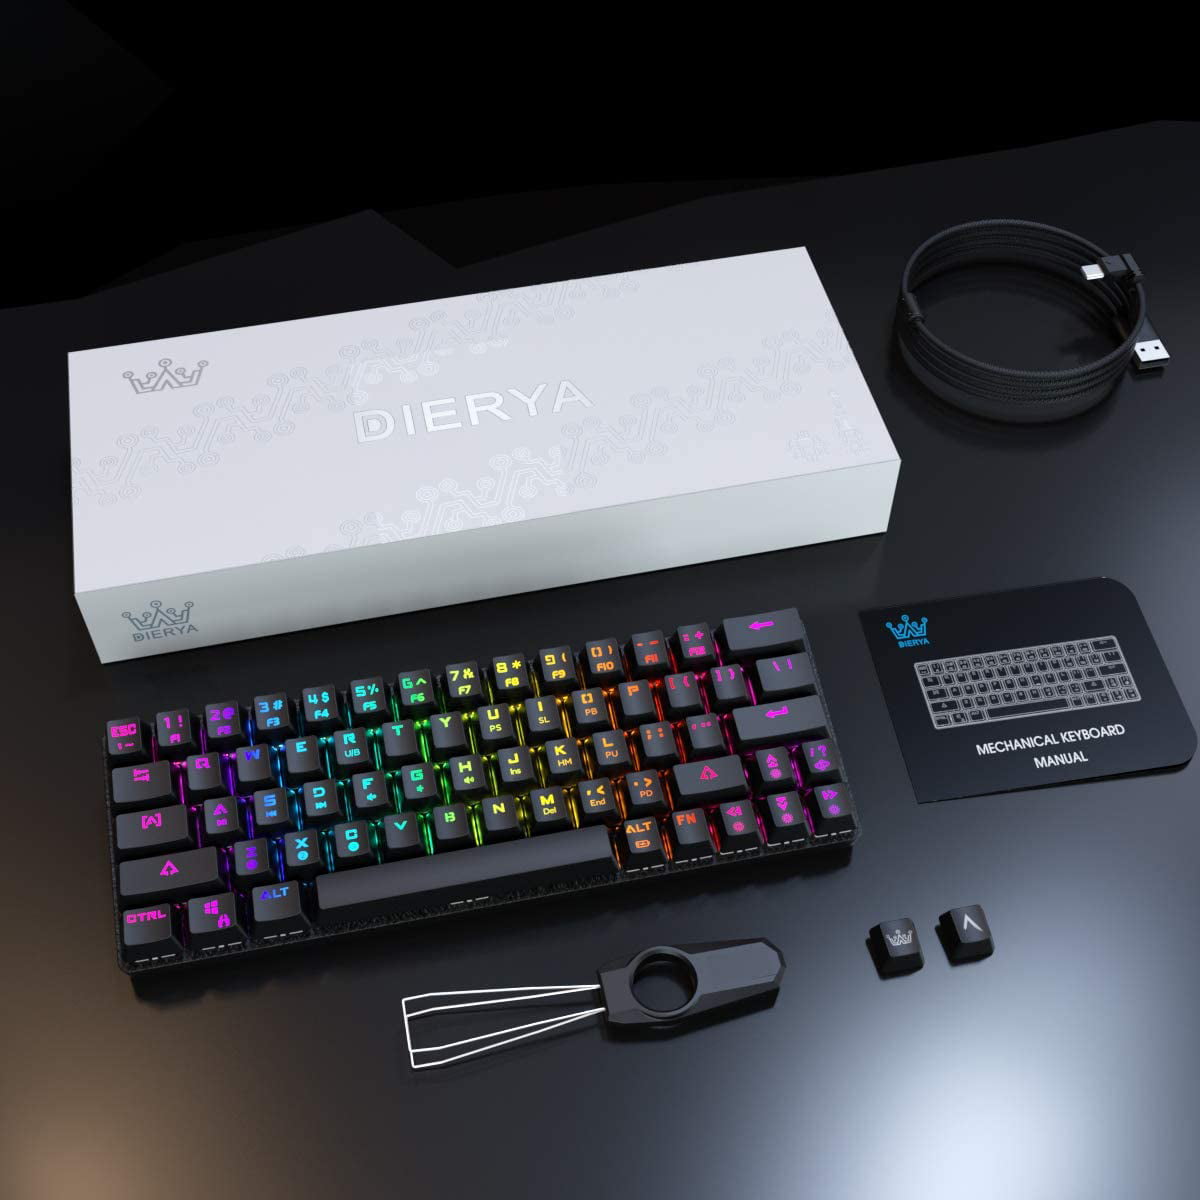 DIERYA RGB Mechanical Keyboard 63 Keys Bluetooth 4.0 LED 60% Backlit Wireless USB Wired Gaming Computer Keyboard for Multi-Device iPhone Android Mobile PC Laptop Brown Switch L-452 